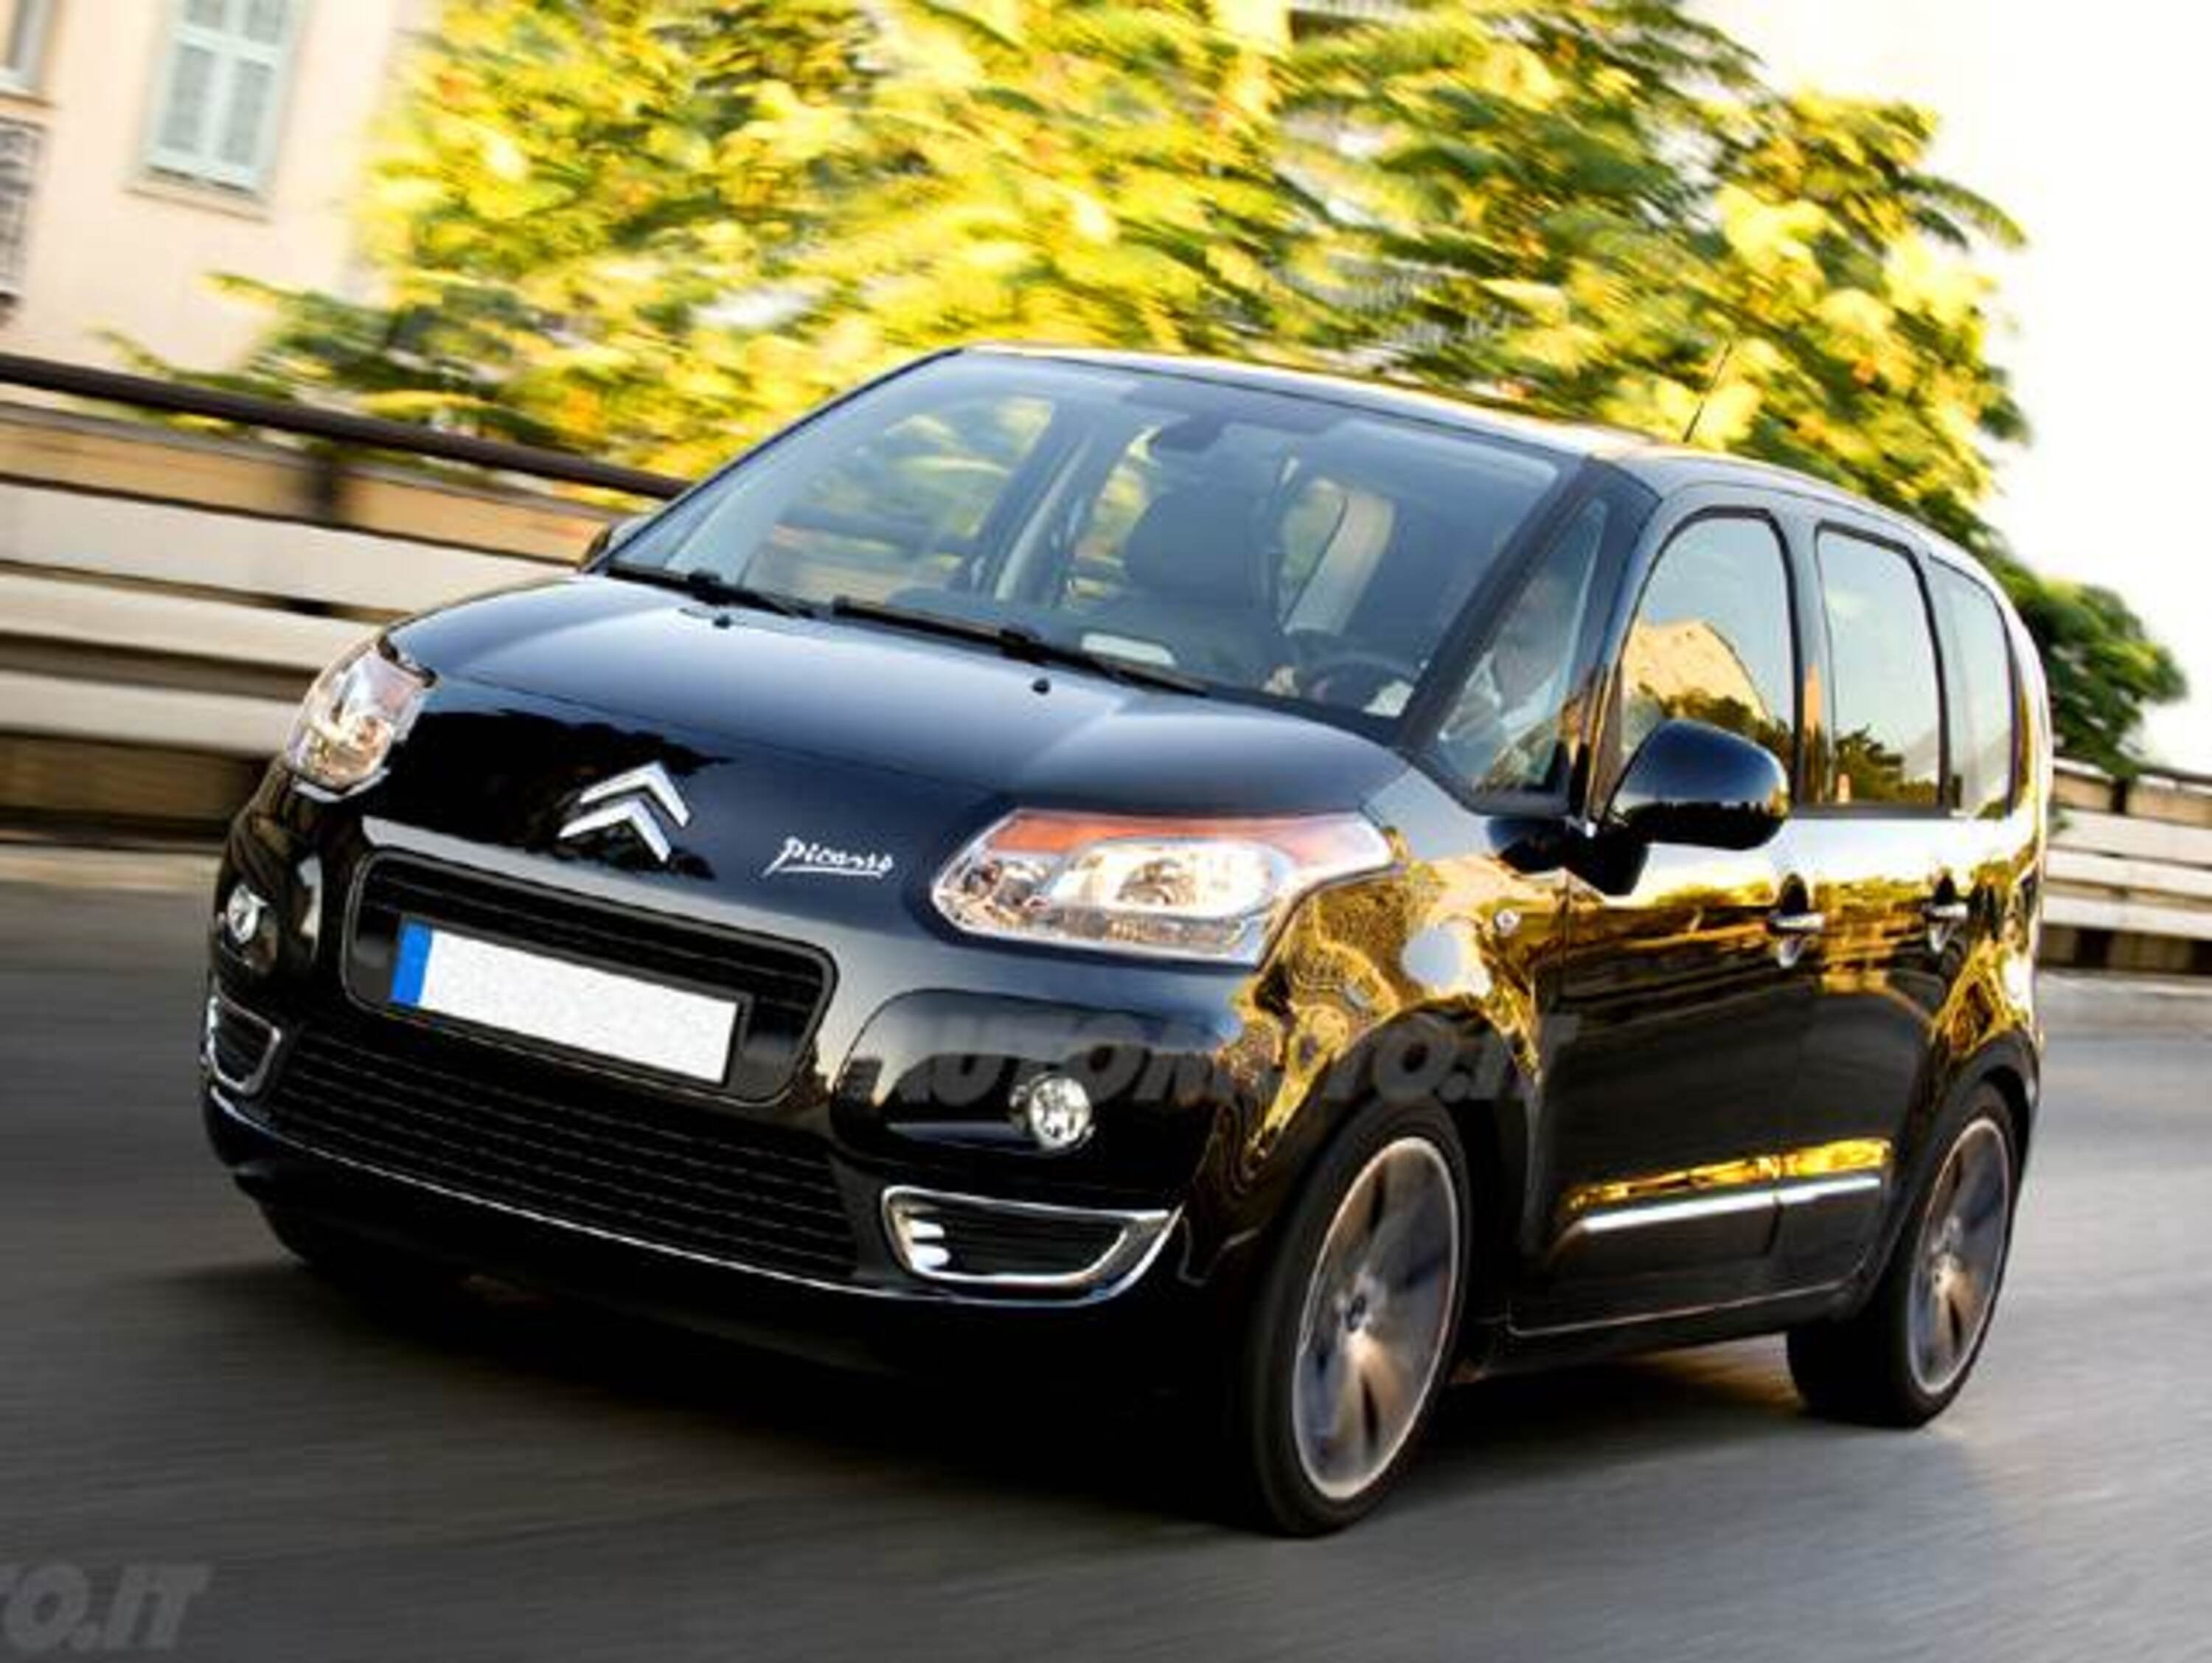 Citroen C3 Picasso 1.6 HDi 90 airdream Business